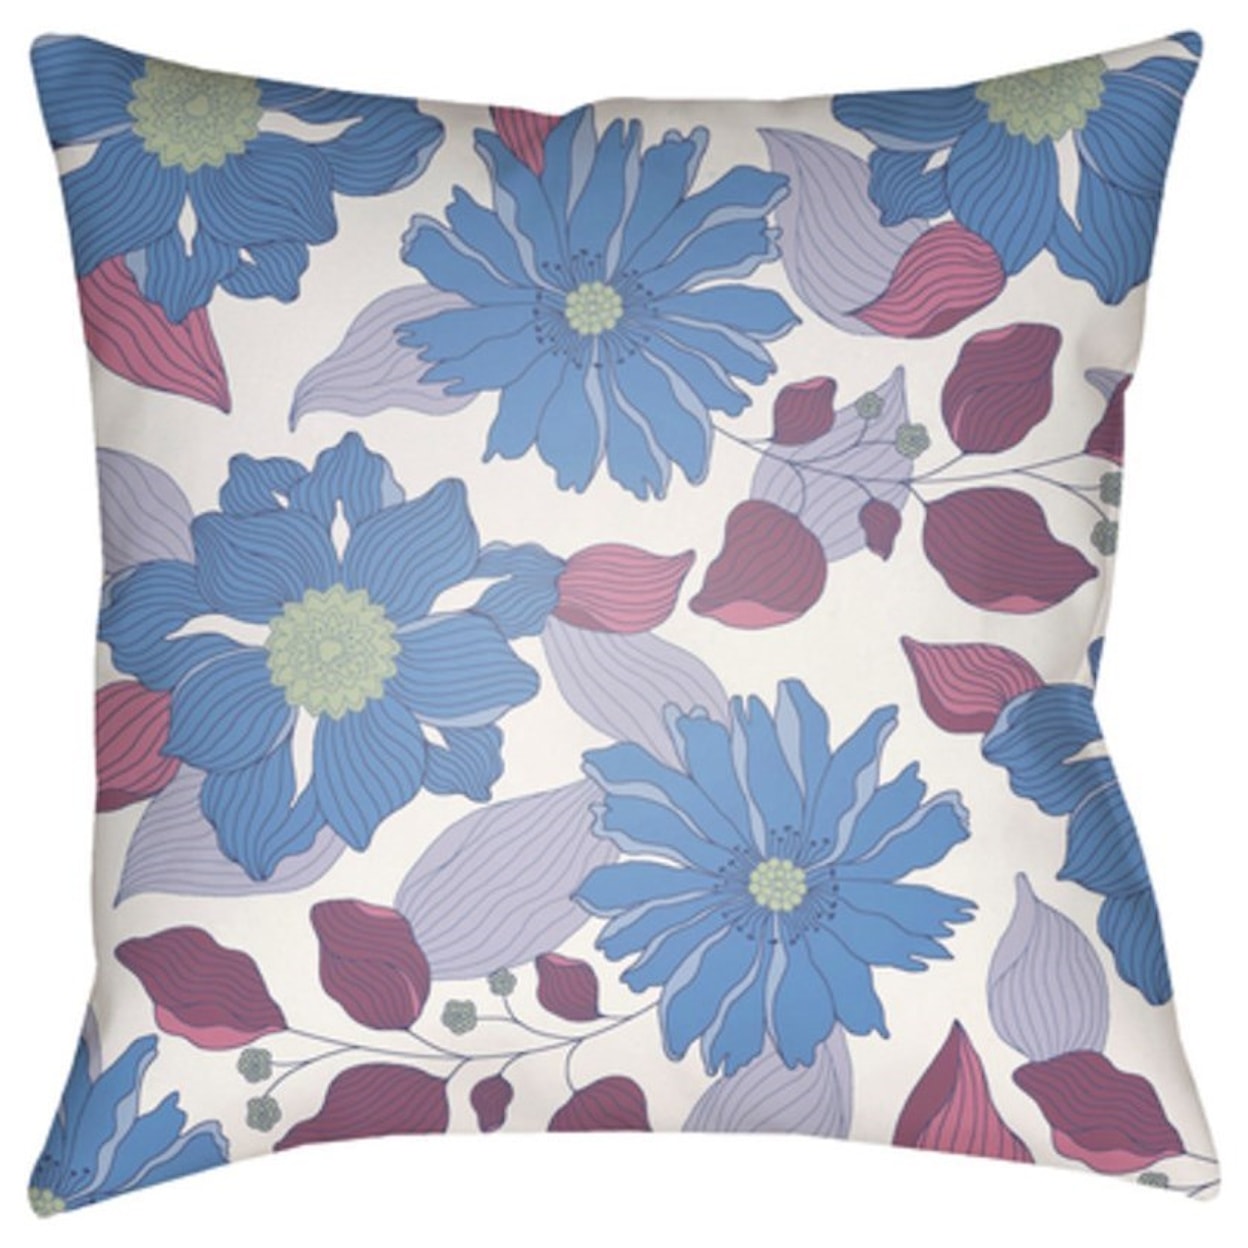 Surya Moody Floral Pillow